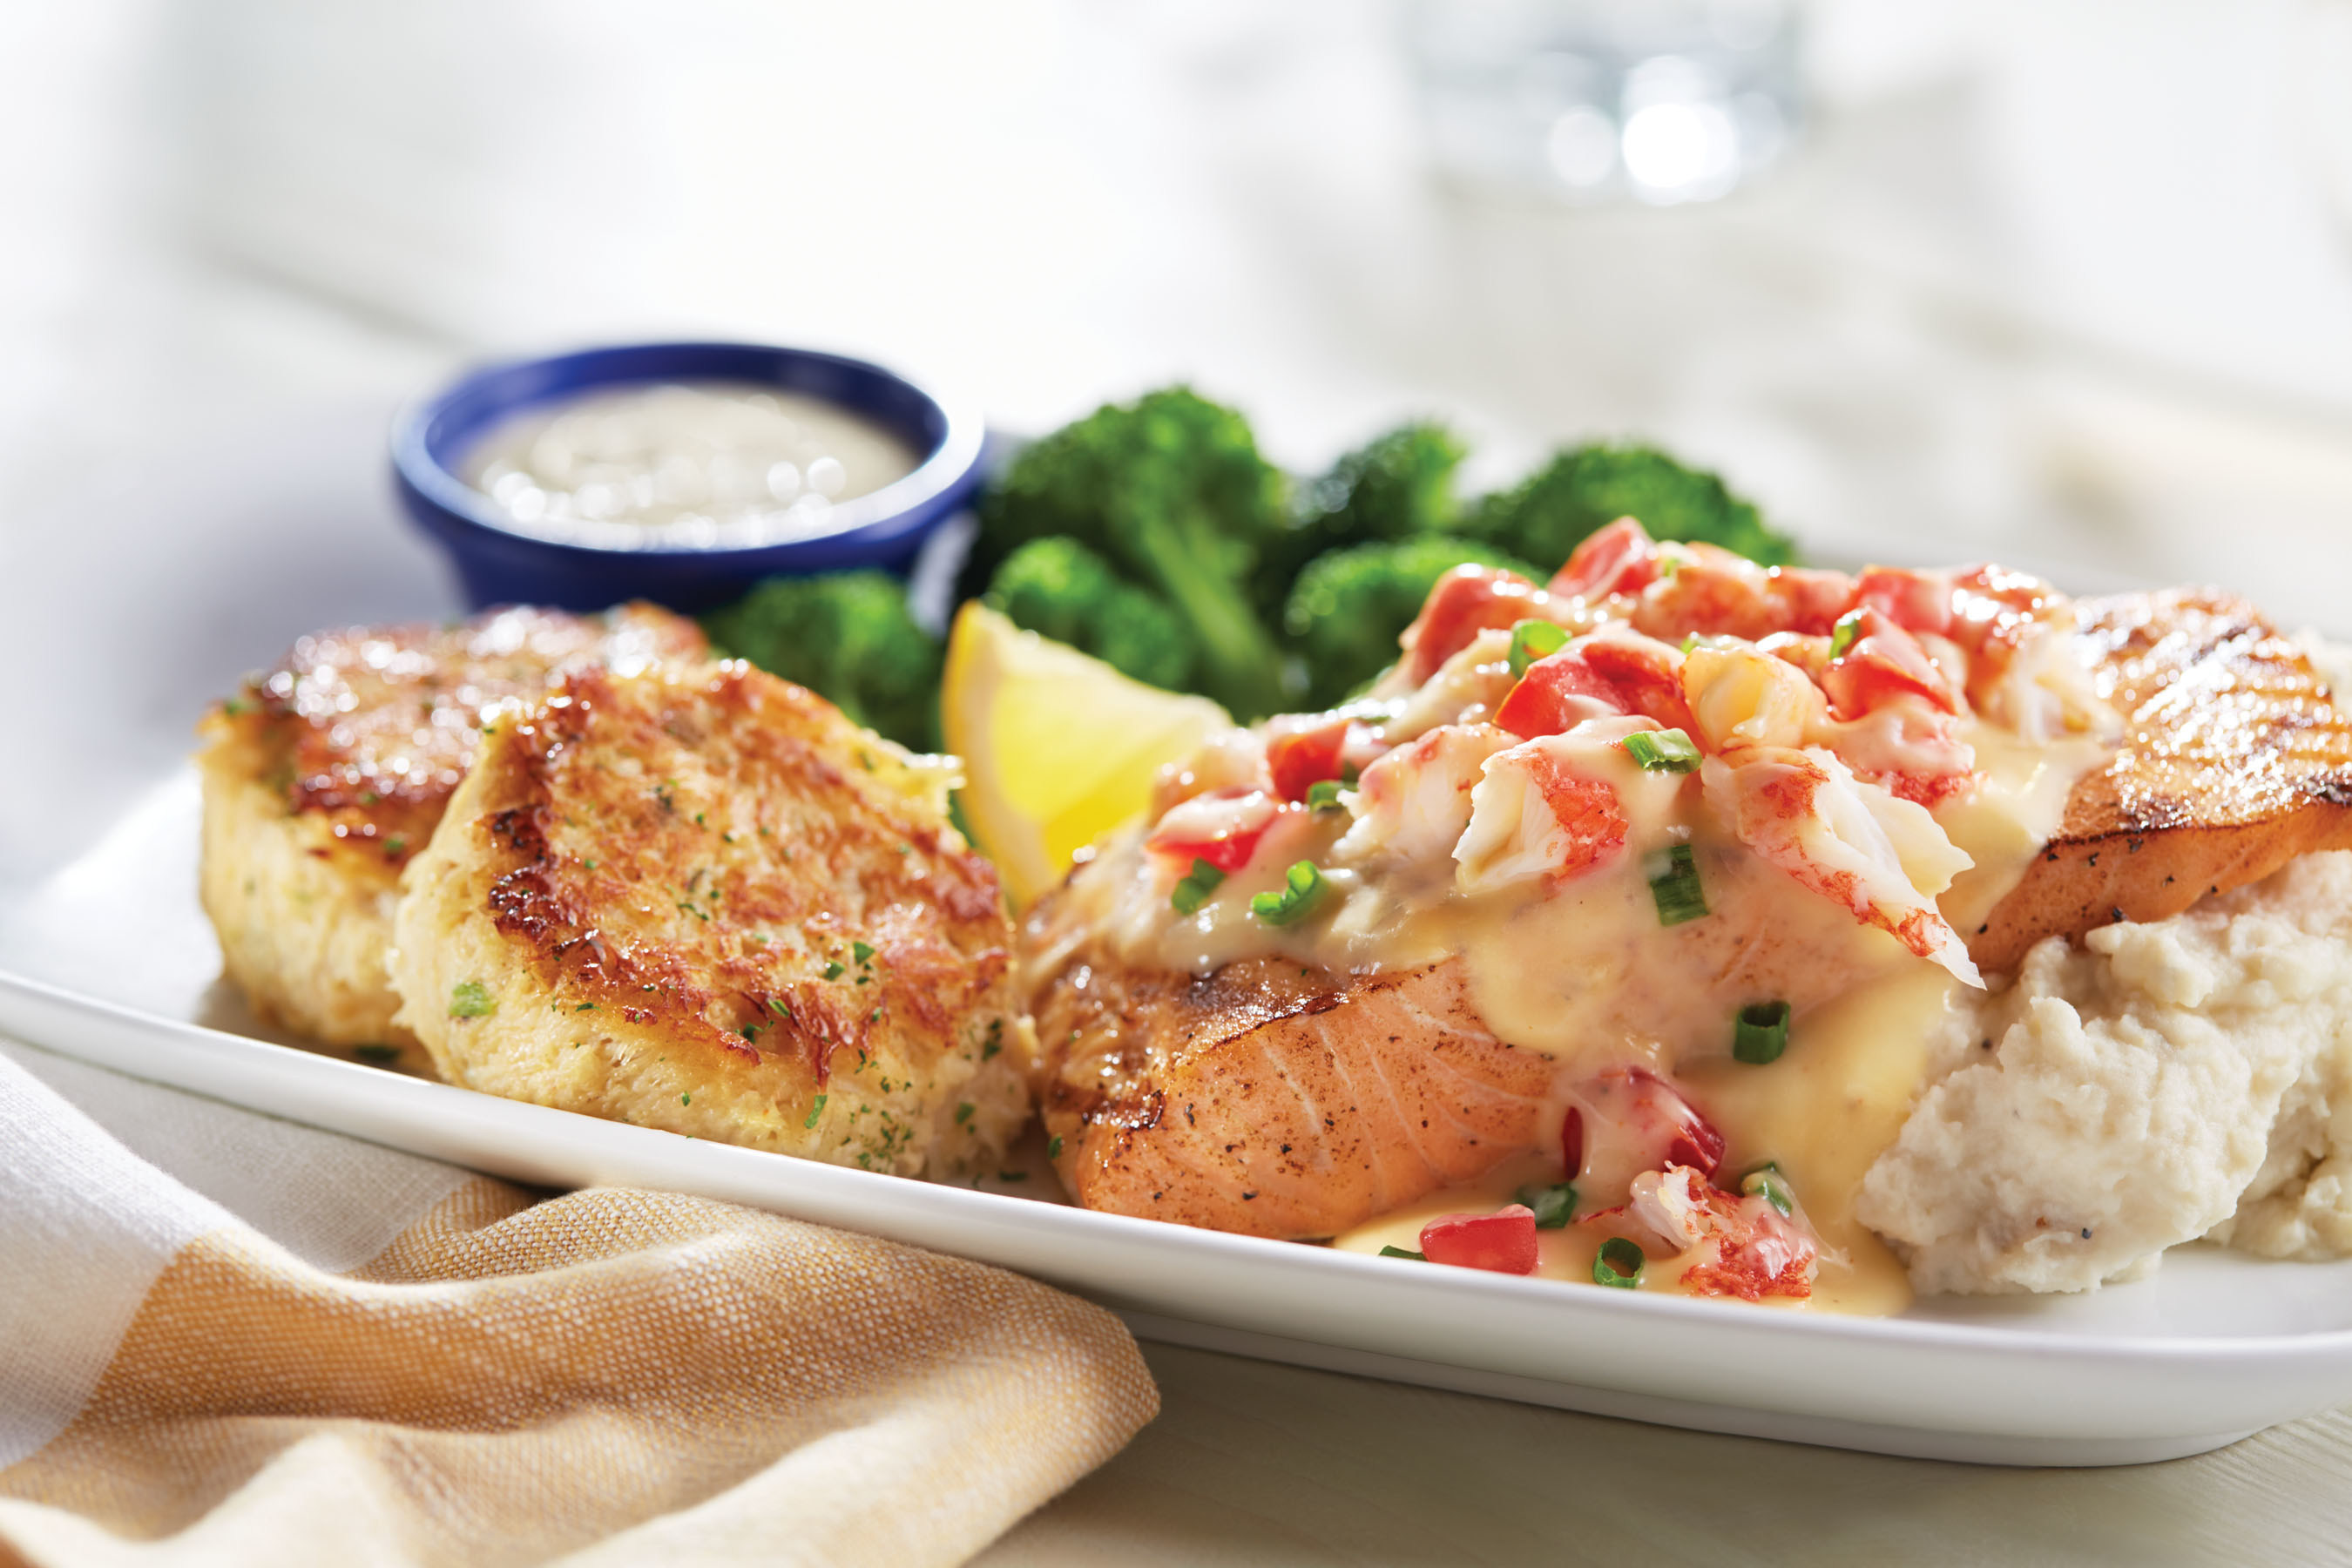 For the first time, Red Lobster is pairing wood-grilled, fresh Atlantic Salmon with premium jumbo lump crab cakes and a savory crab topping in its NEW! Jumbo Lump Crab Cakes & Crab-Topped Salmon.